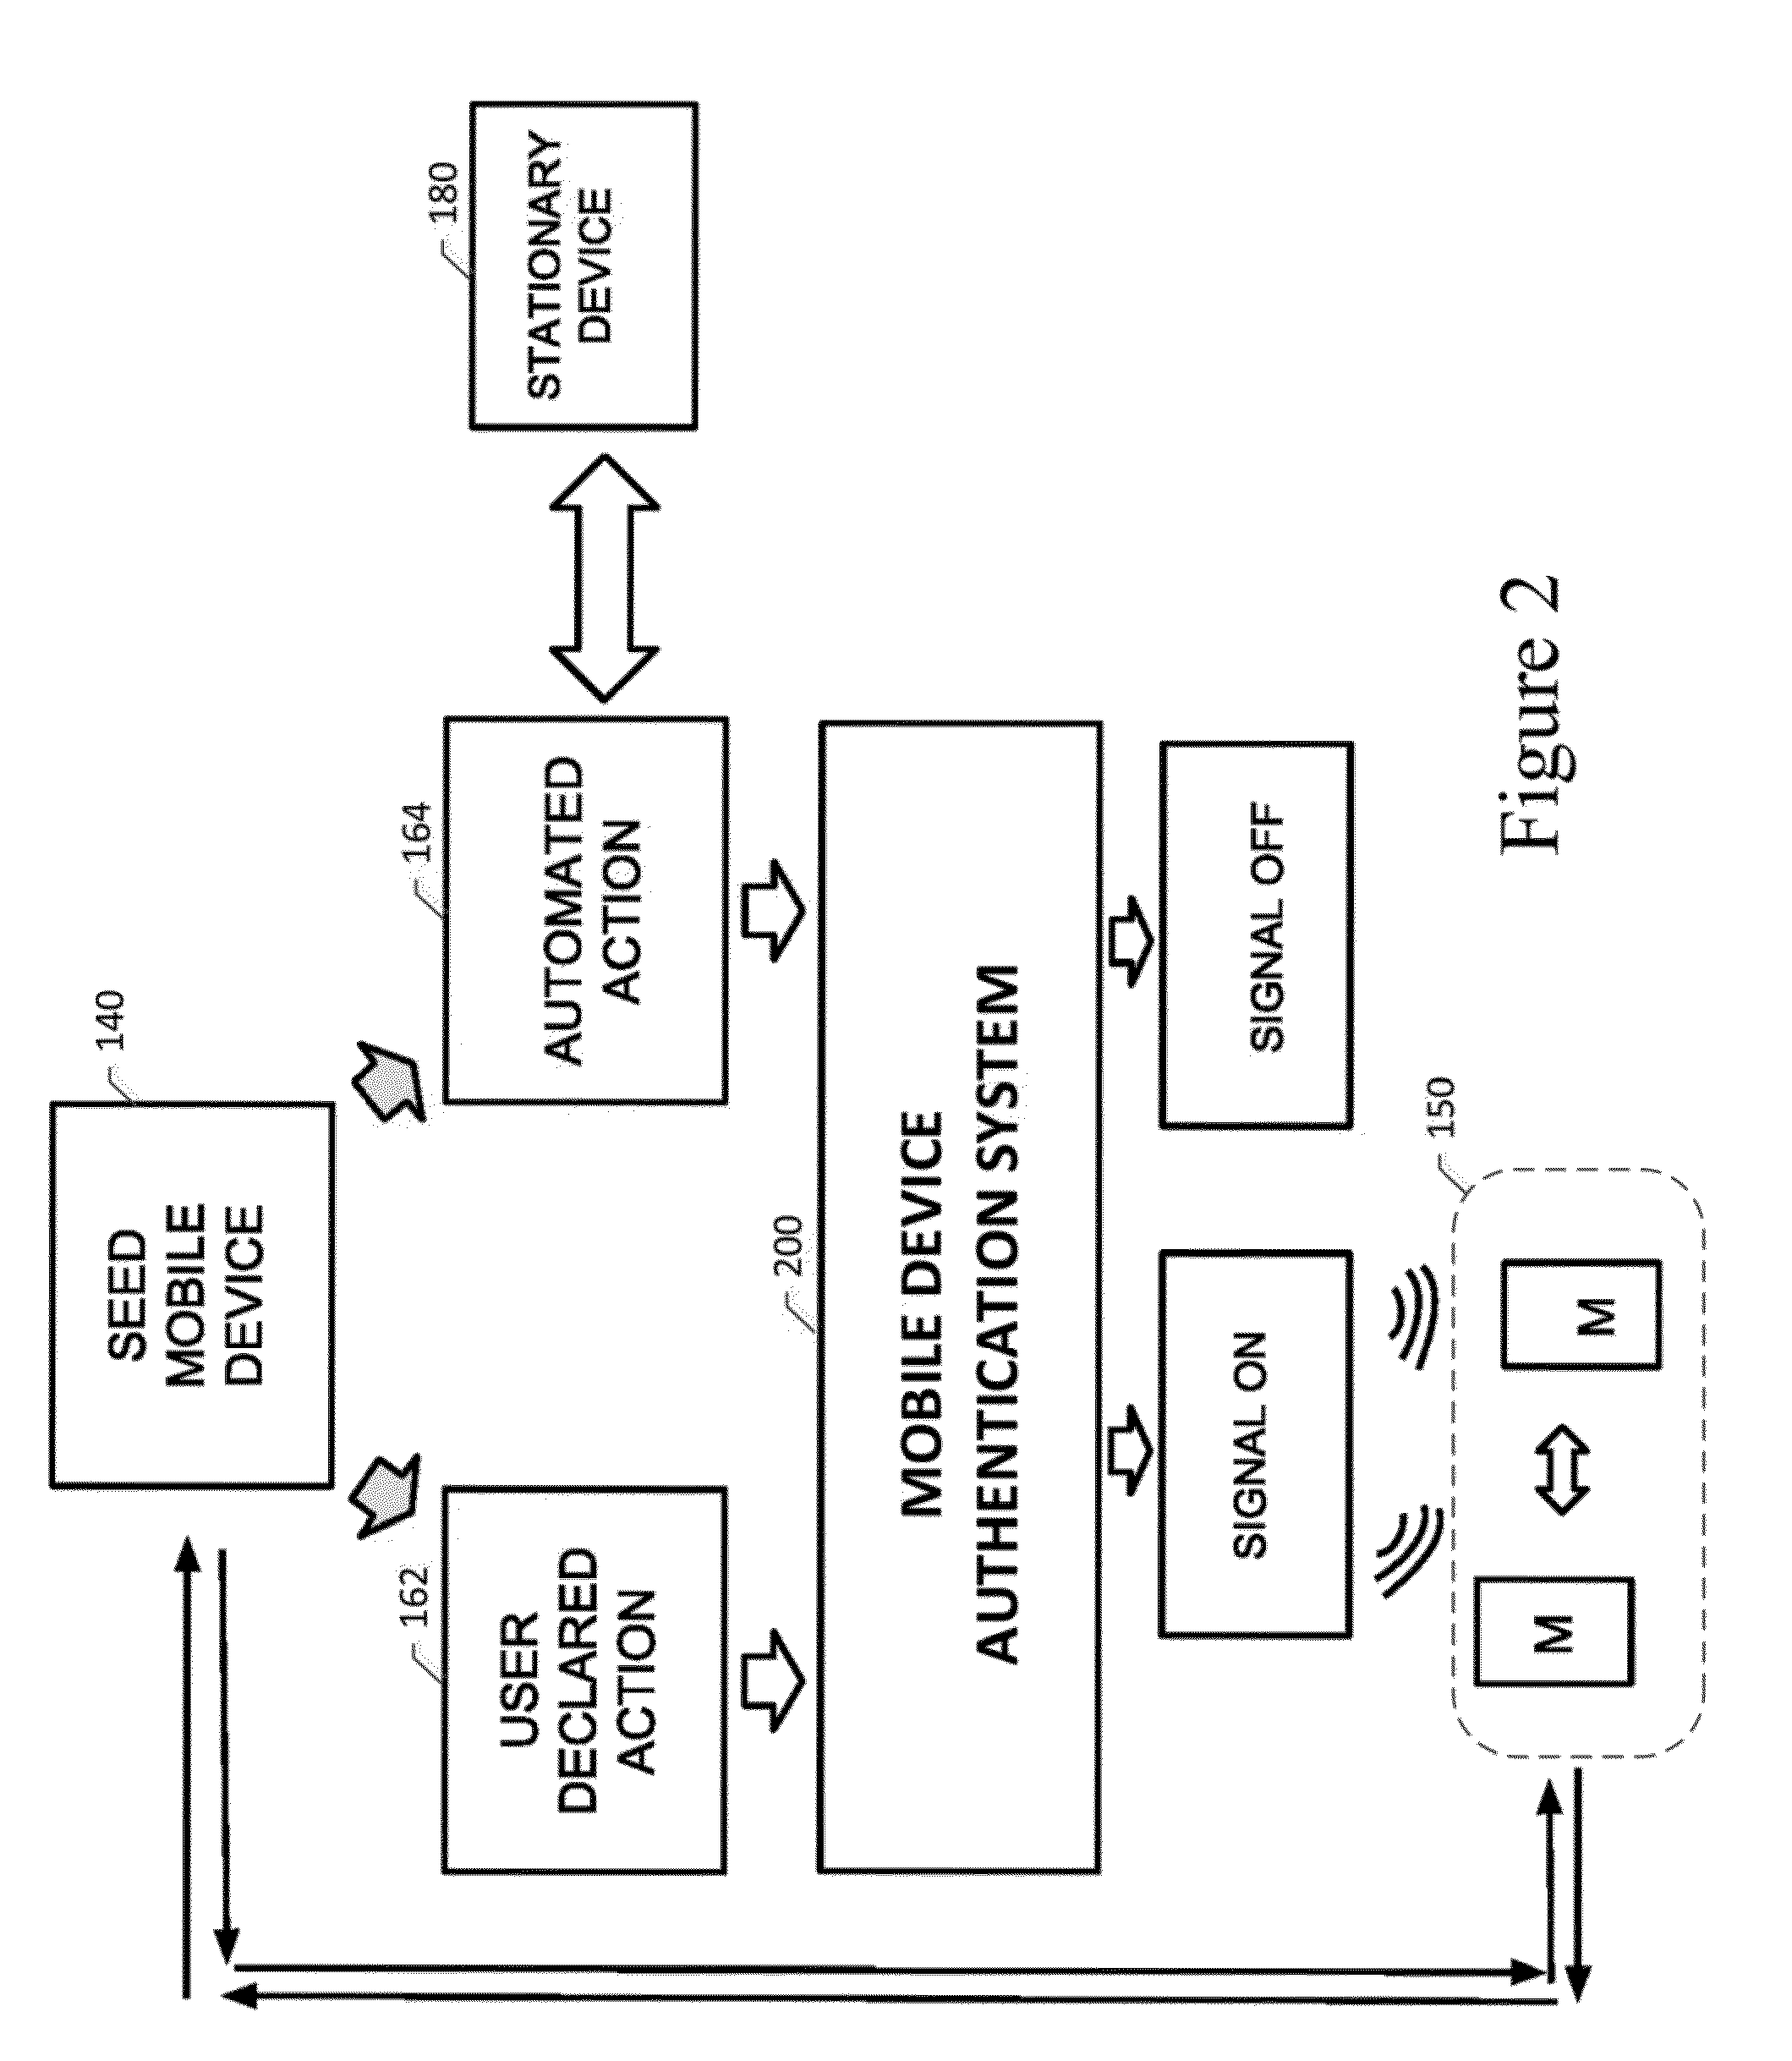 System and method for broadcasting decoy signals and an authentic signal in a location of interest